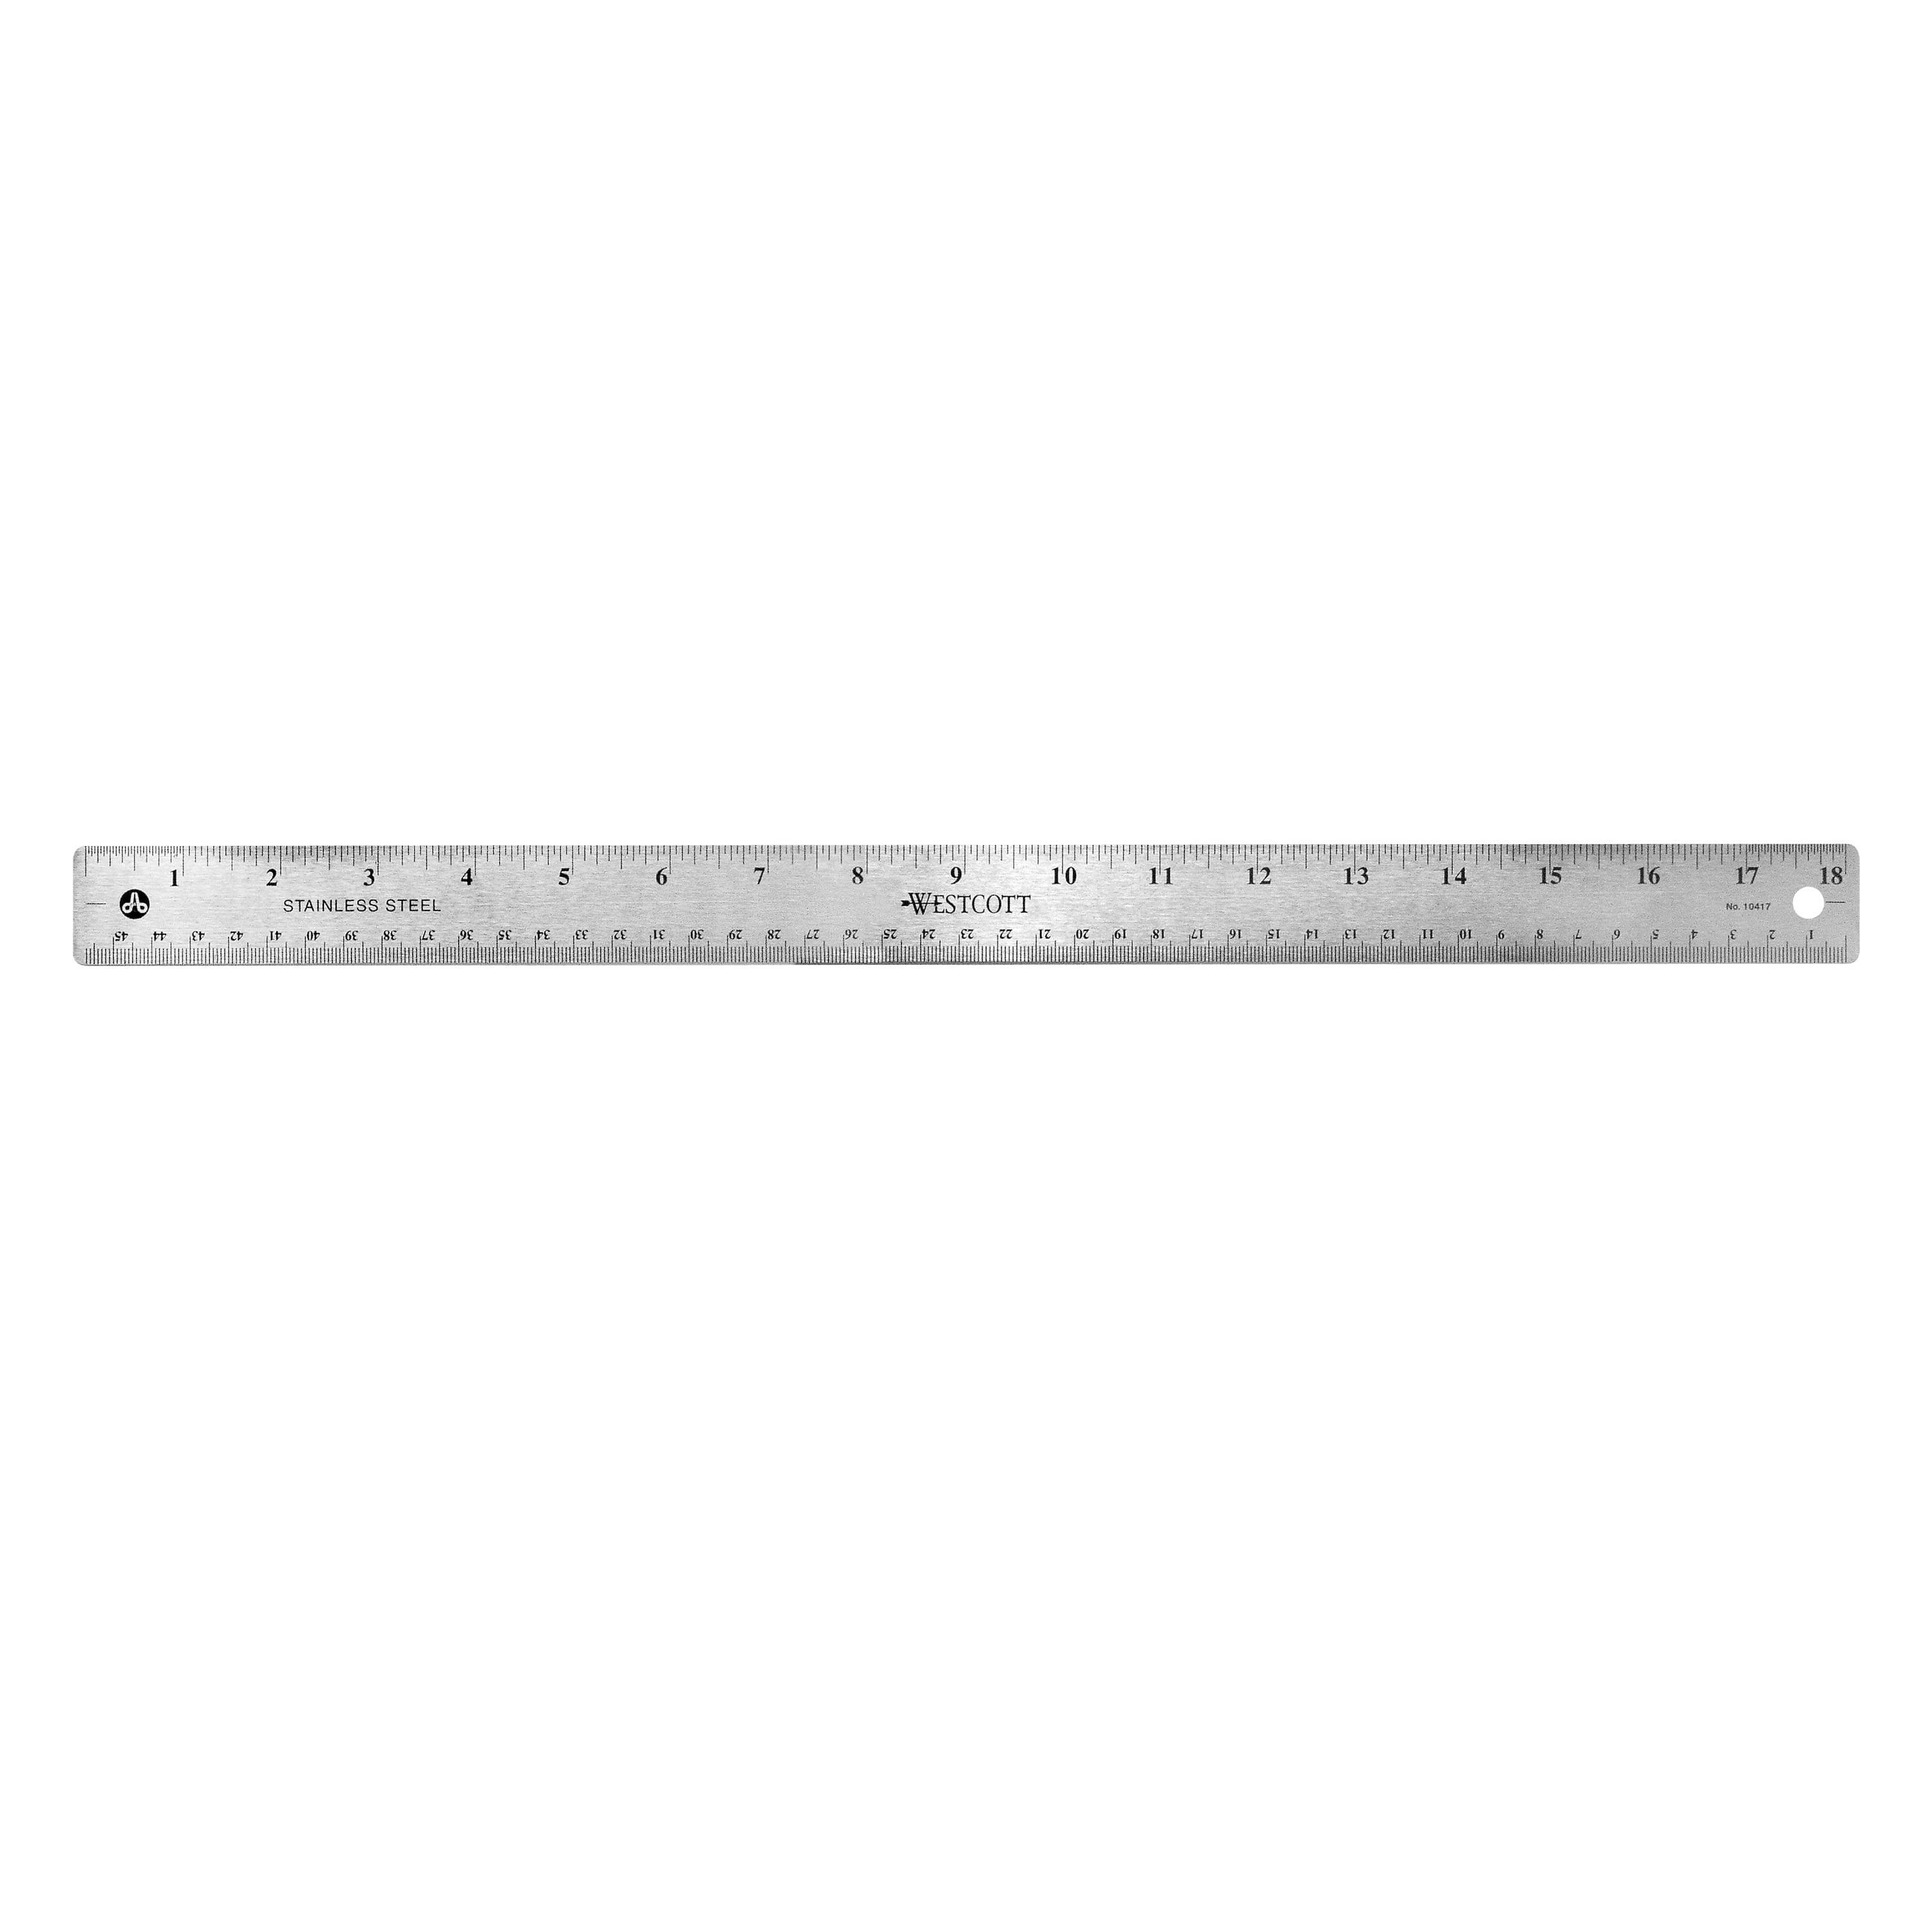 32 & 64 divisions per inch 18 Stainless Steel Ruler with Non-Skid Cork Backing 